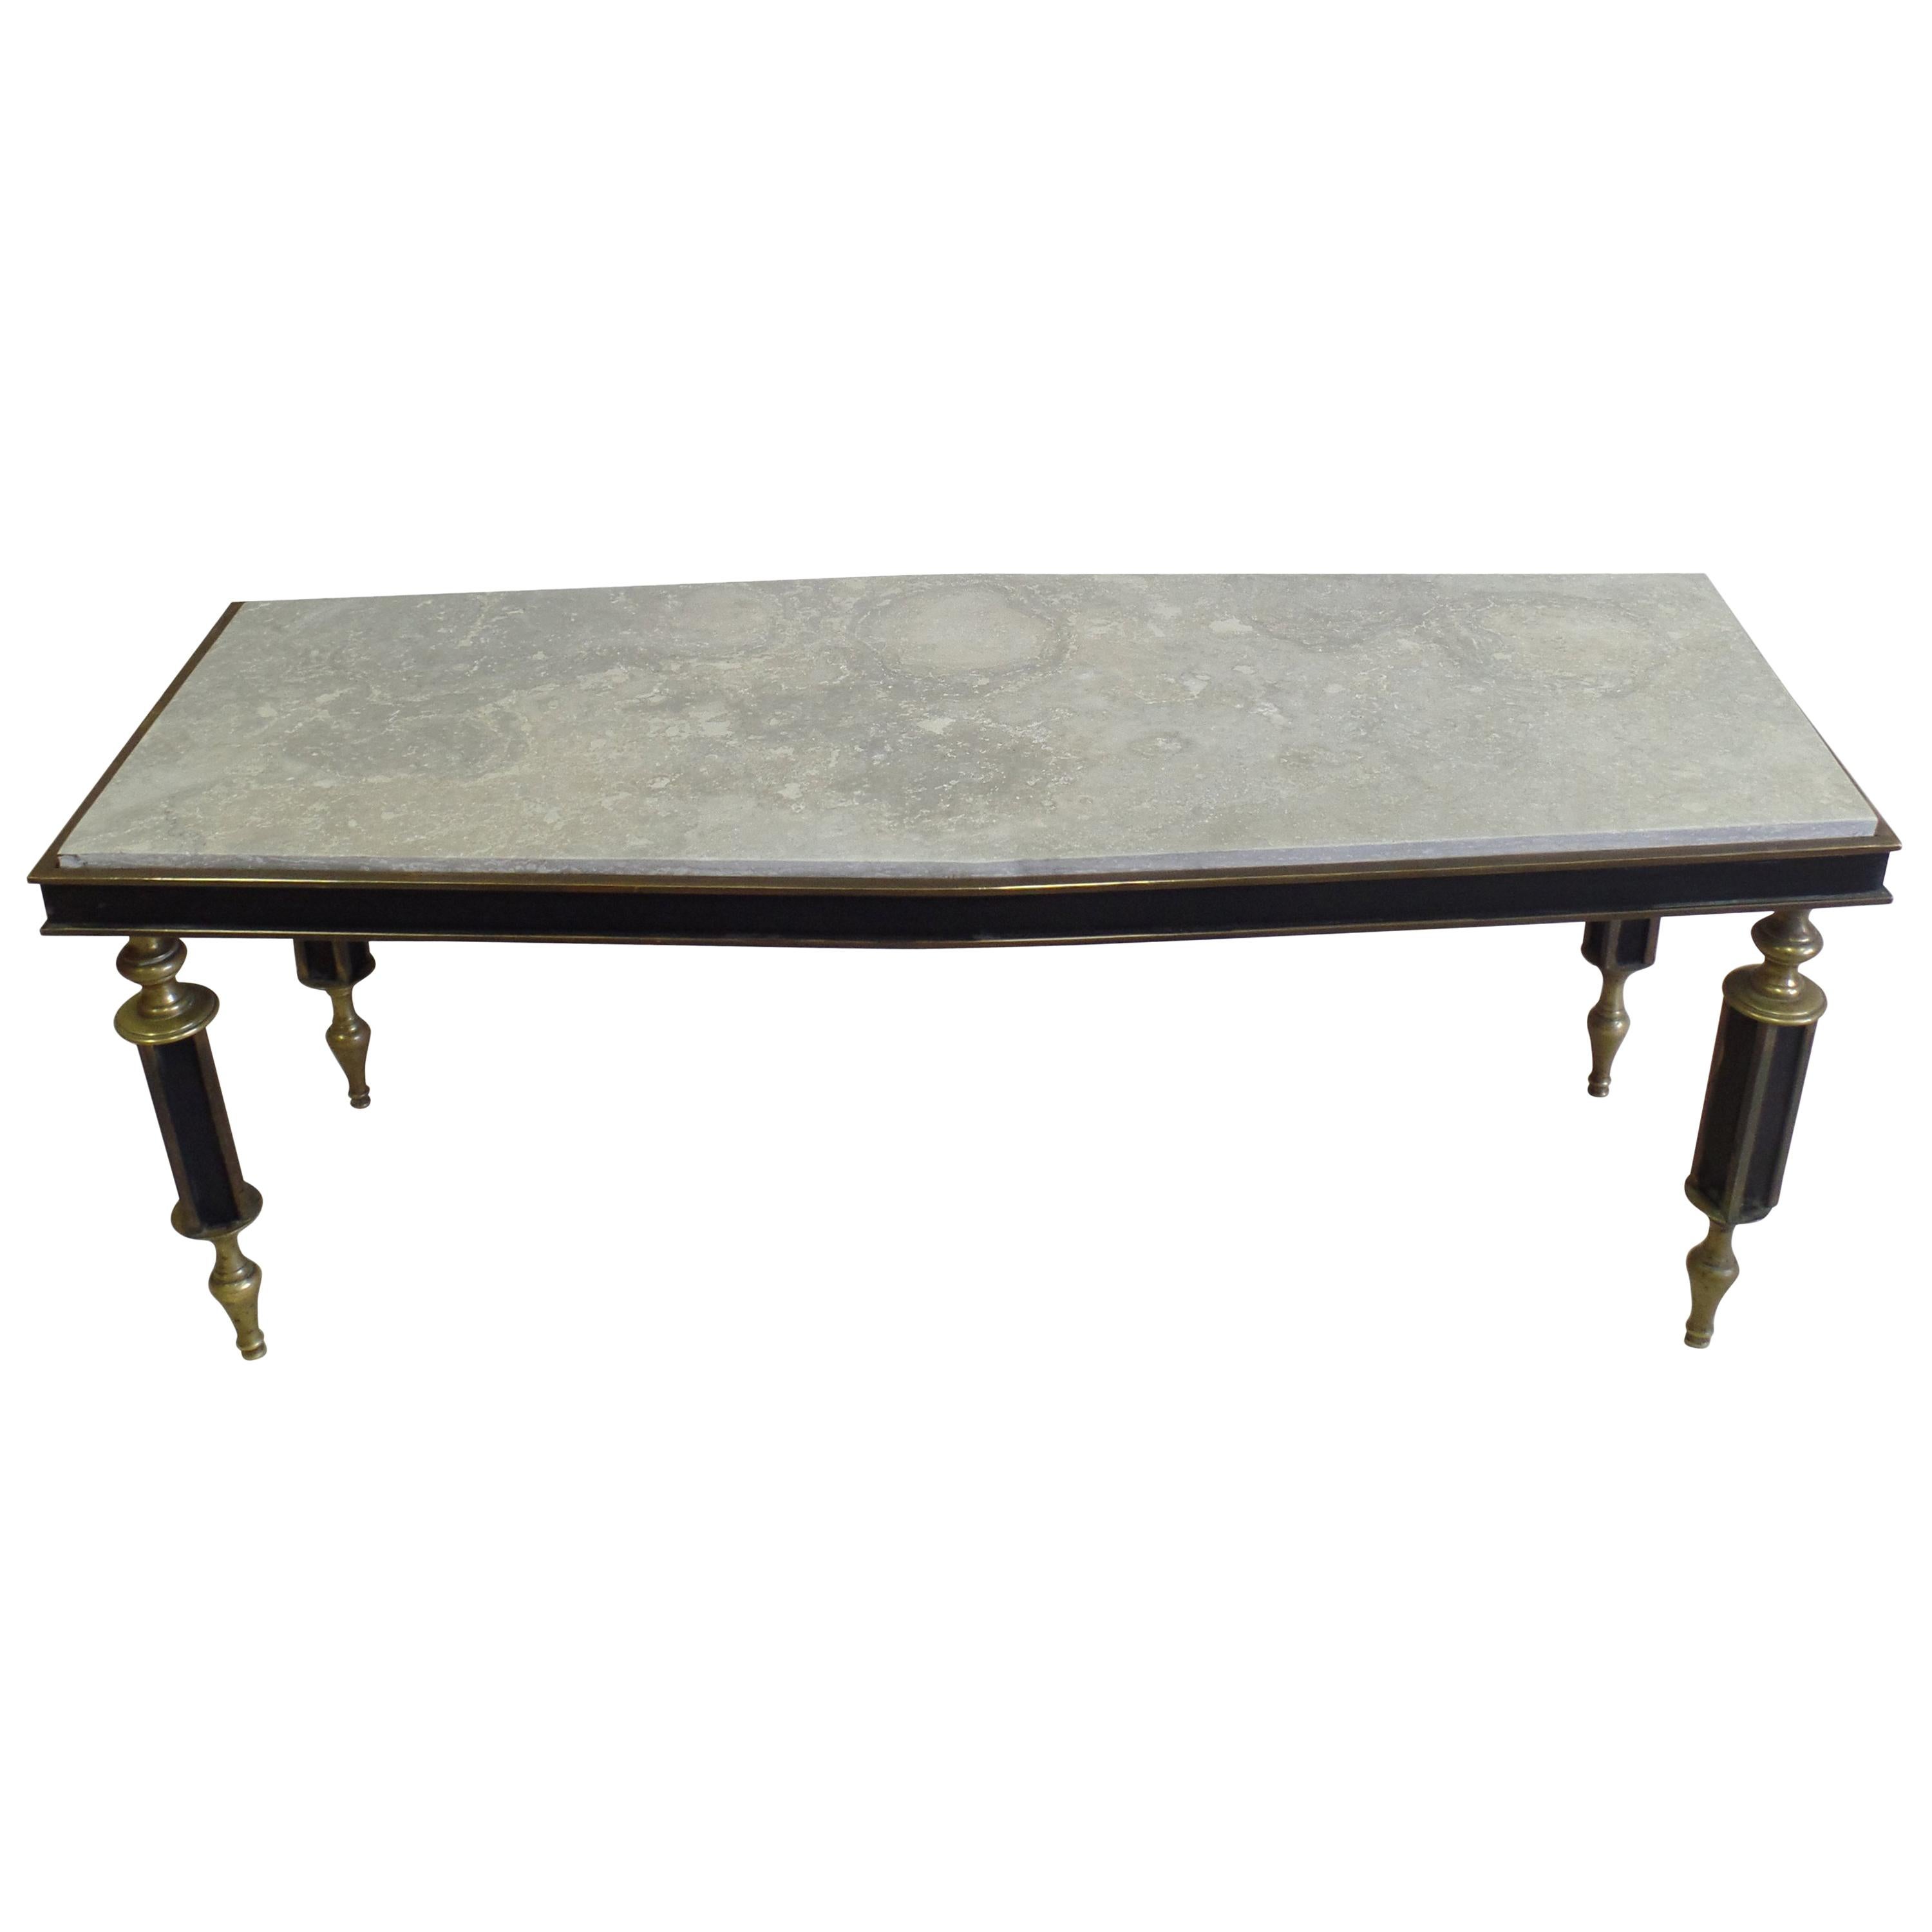 Rare, important Italian midcentury cocktail table in the modern neoclassical style attributed to Gio Ponti.

The table is set on four delicate gilt bronze and black enameled legs that dramatically alternate between turning and tapering. A silver